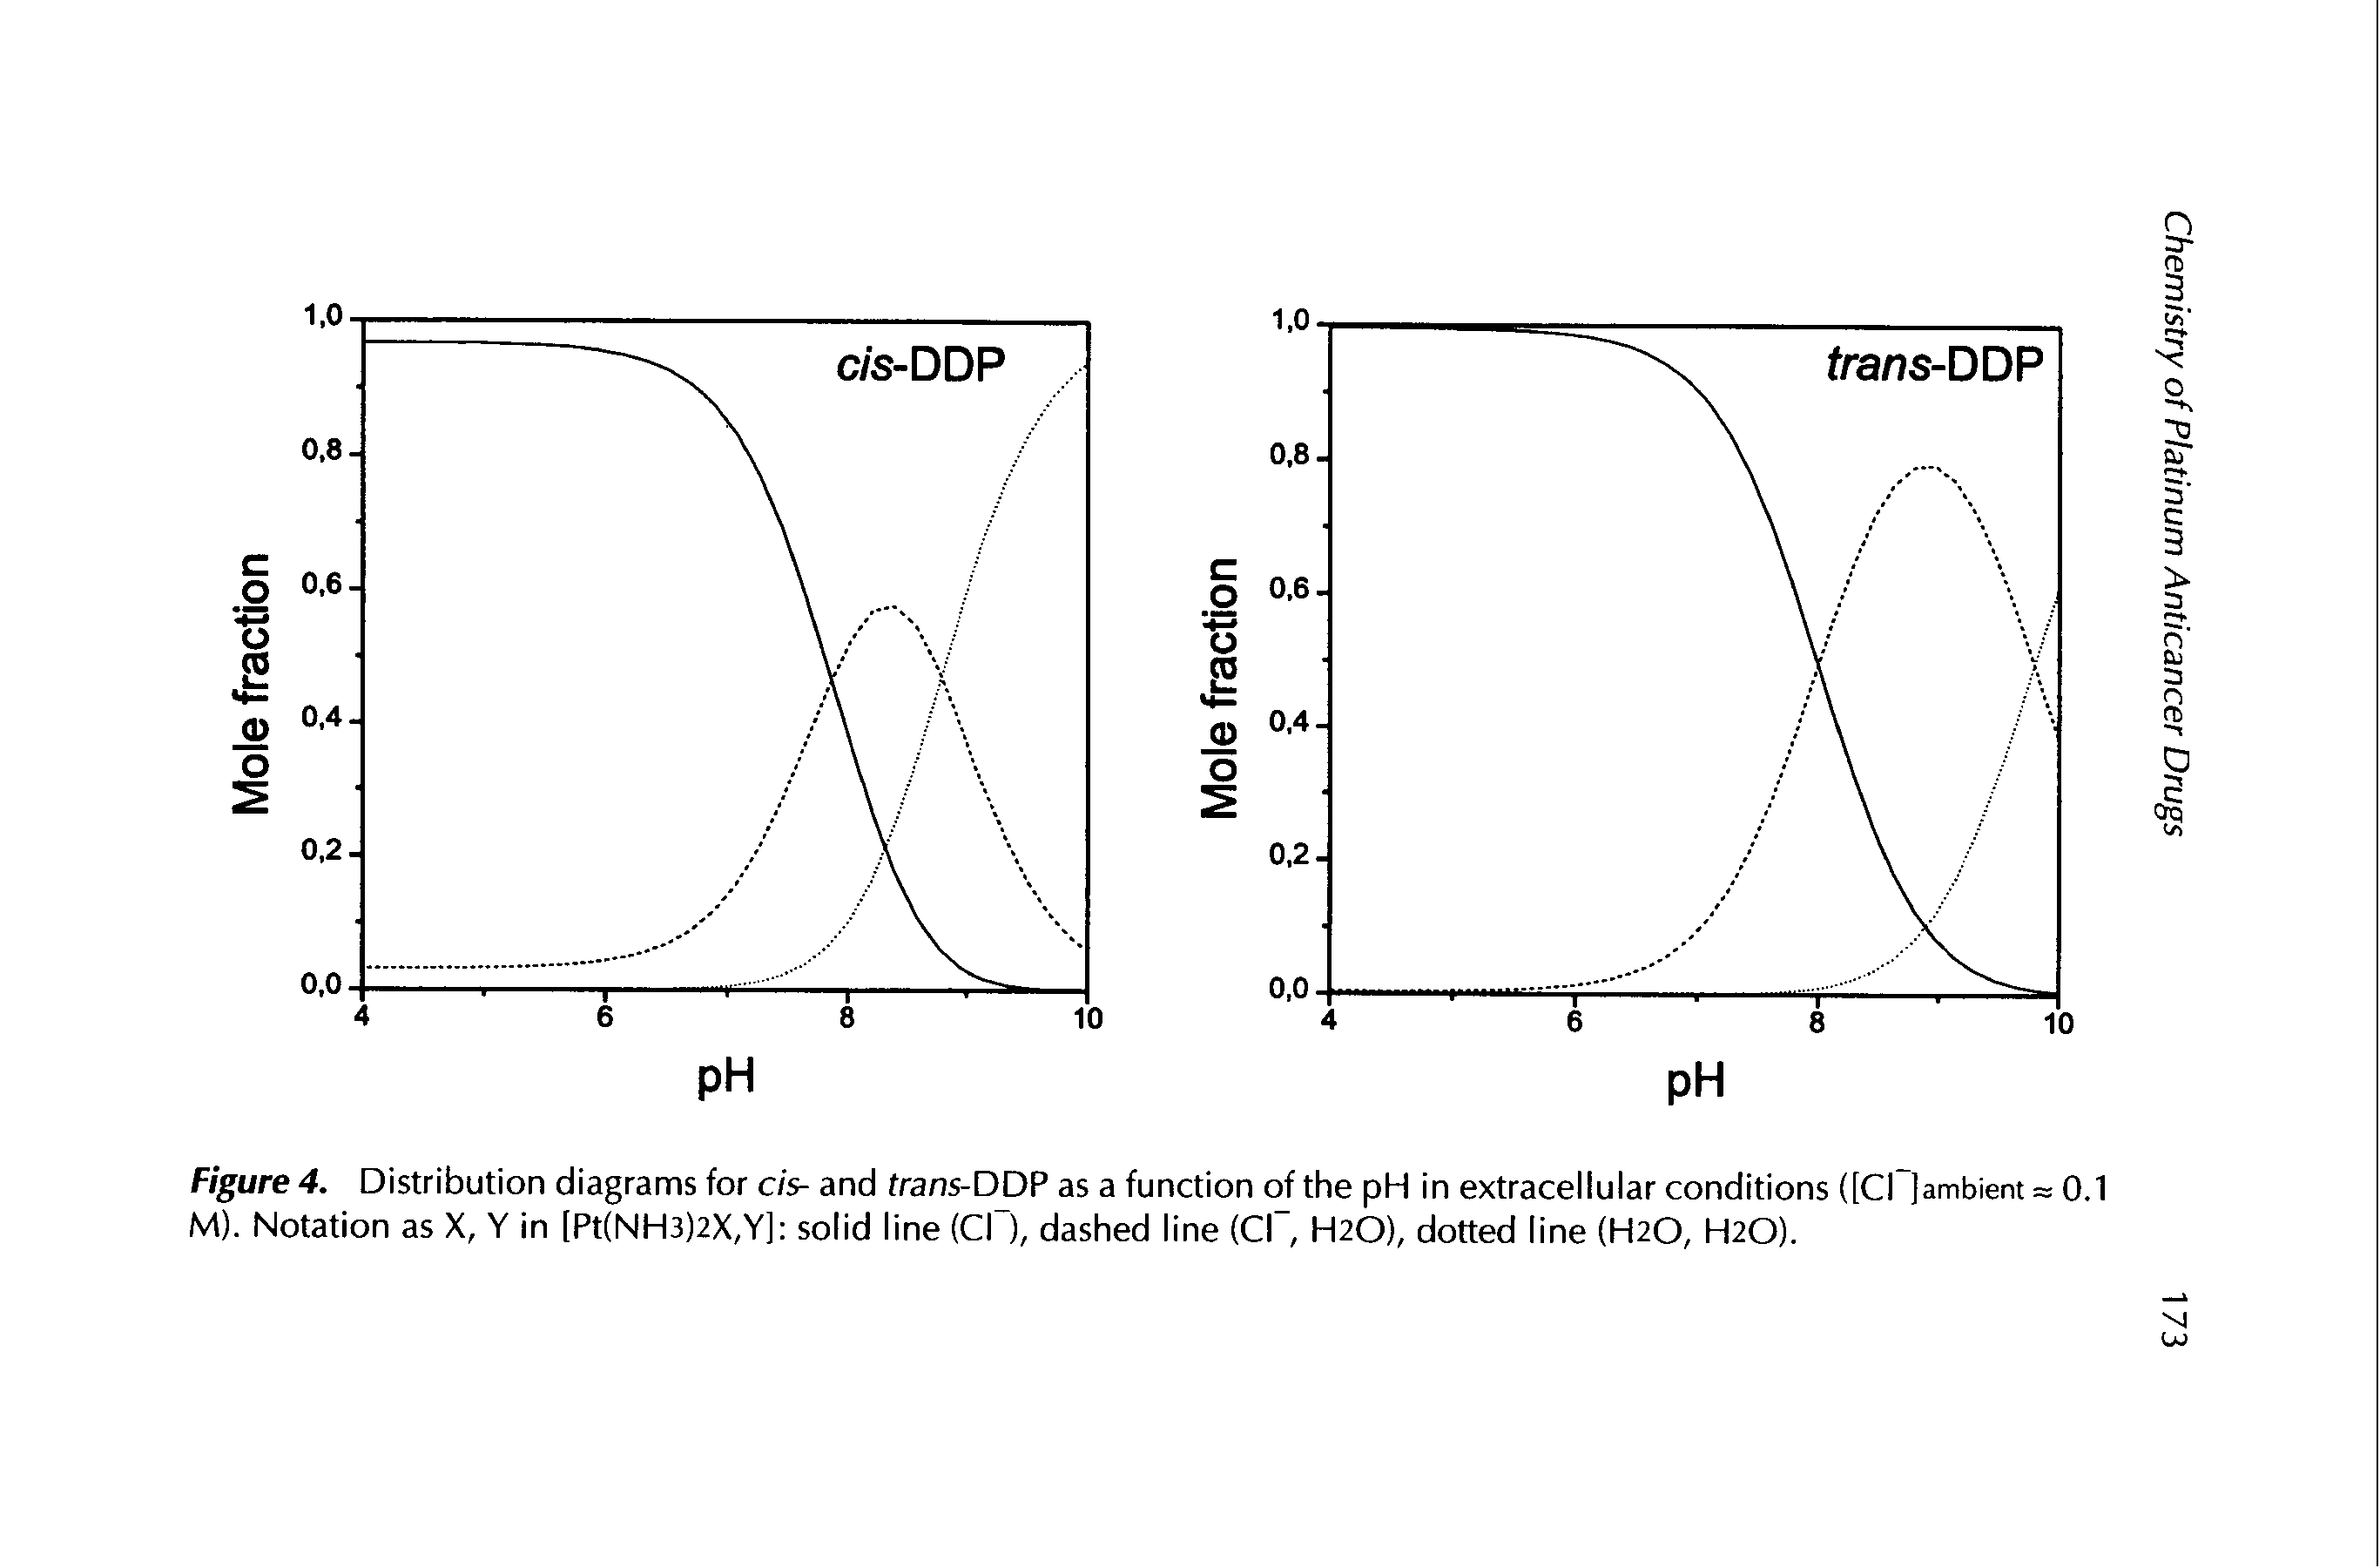 Figure 4. Distribution diagrams for c/s- and trans-DDP as a function of the pH in extracellular conditions ([Cl [ambient = 0.1 M). Notation as X, Y in [Pt(NH3)2X,Y[ solid line (Cl ), dashed line (Cl, H2O), dotted line (H2O, H2O).